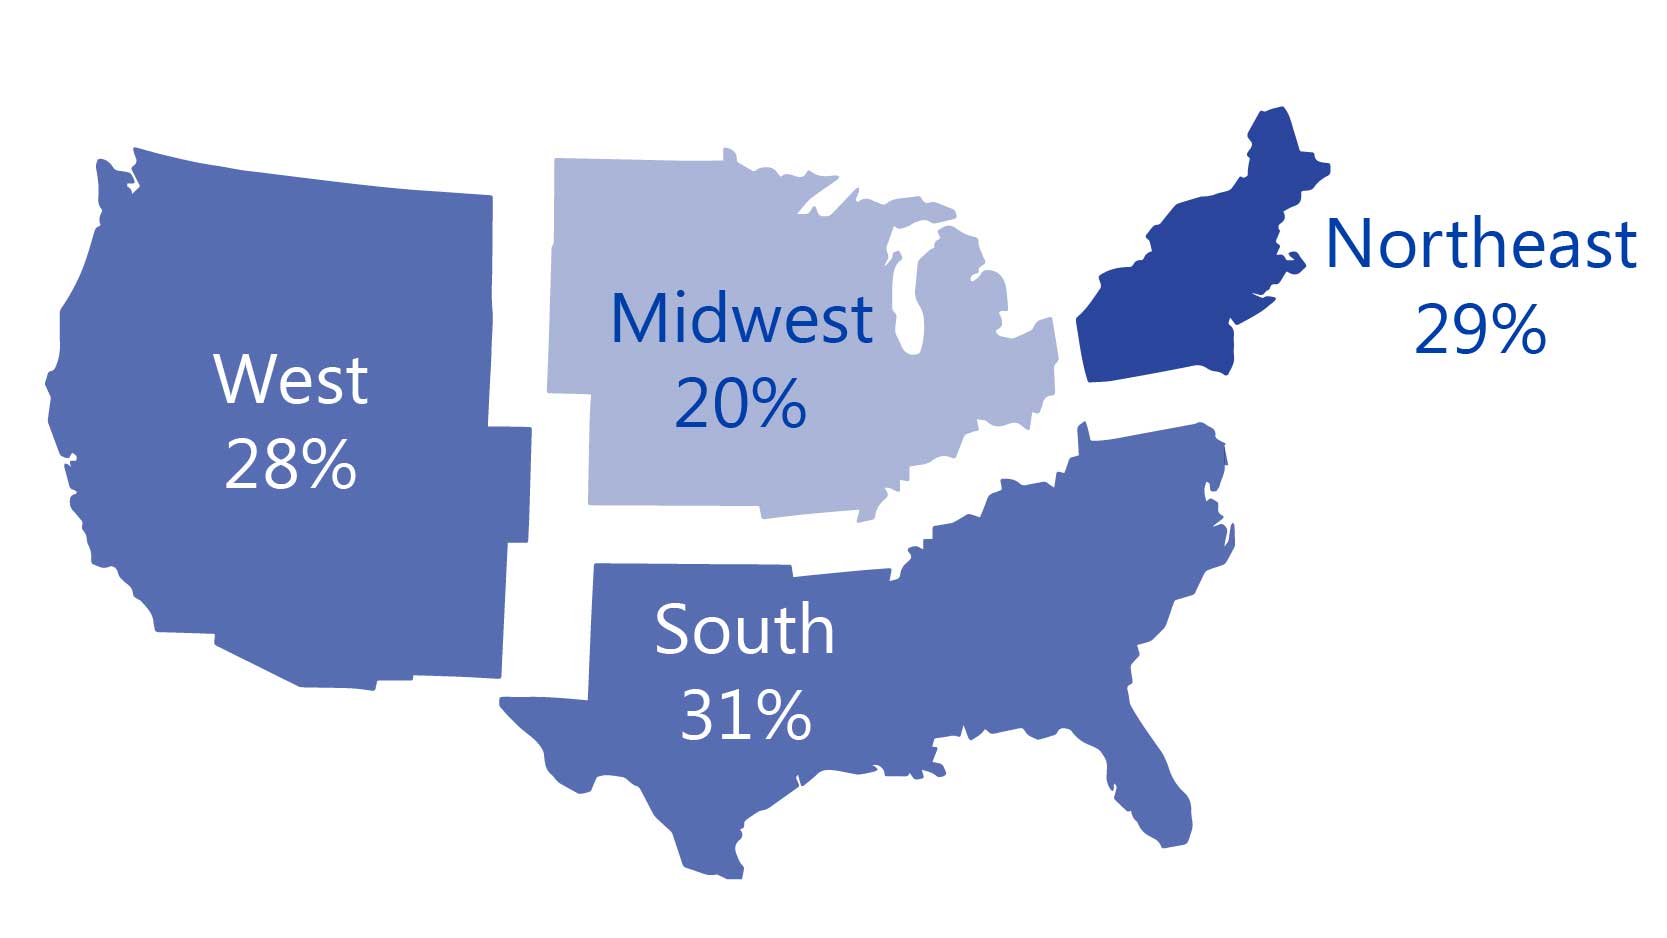 U.S. small businesses planning spend increase (by region): the South at 31% planning to increase spend, NE at 29%, the West at 28% and Midwest at 20%.